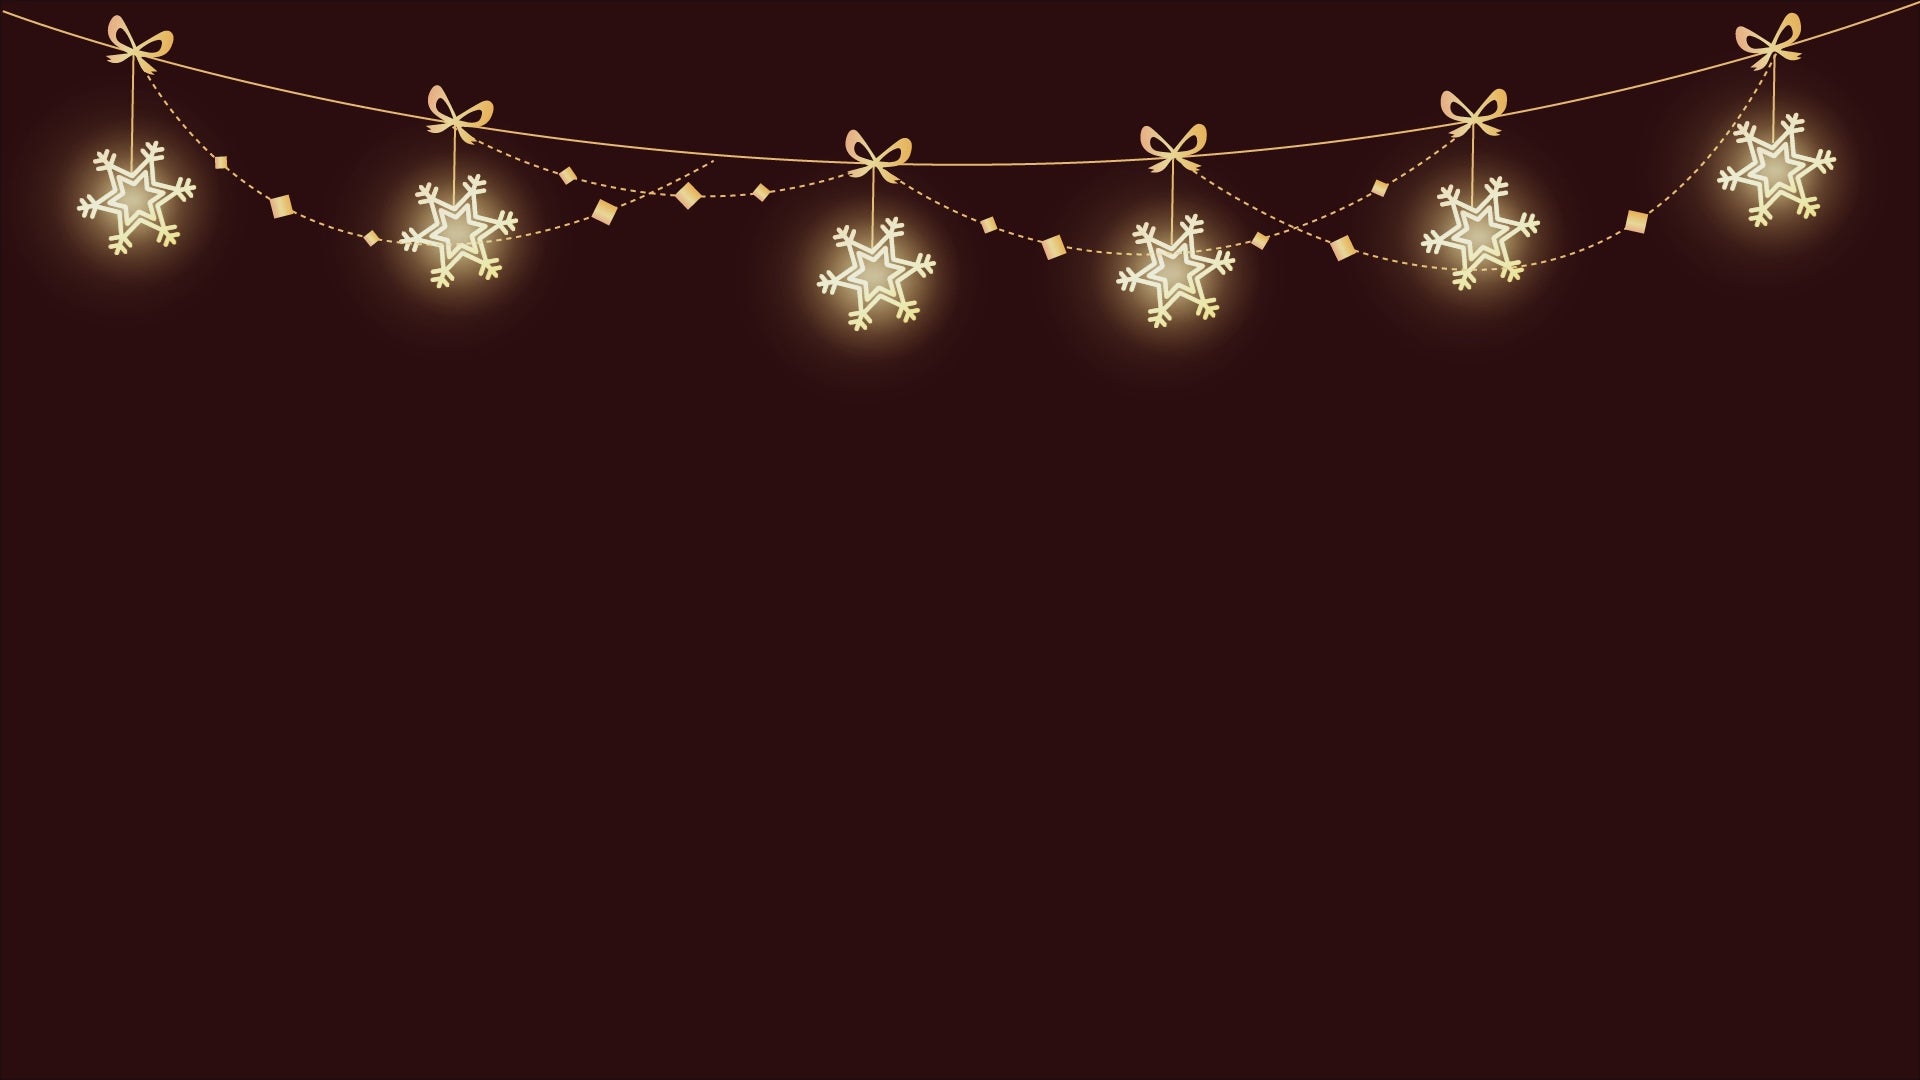 Snow Flakes Light Chain Animated Stream Decorations